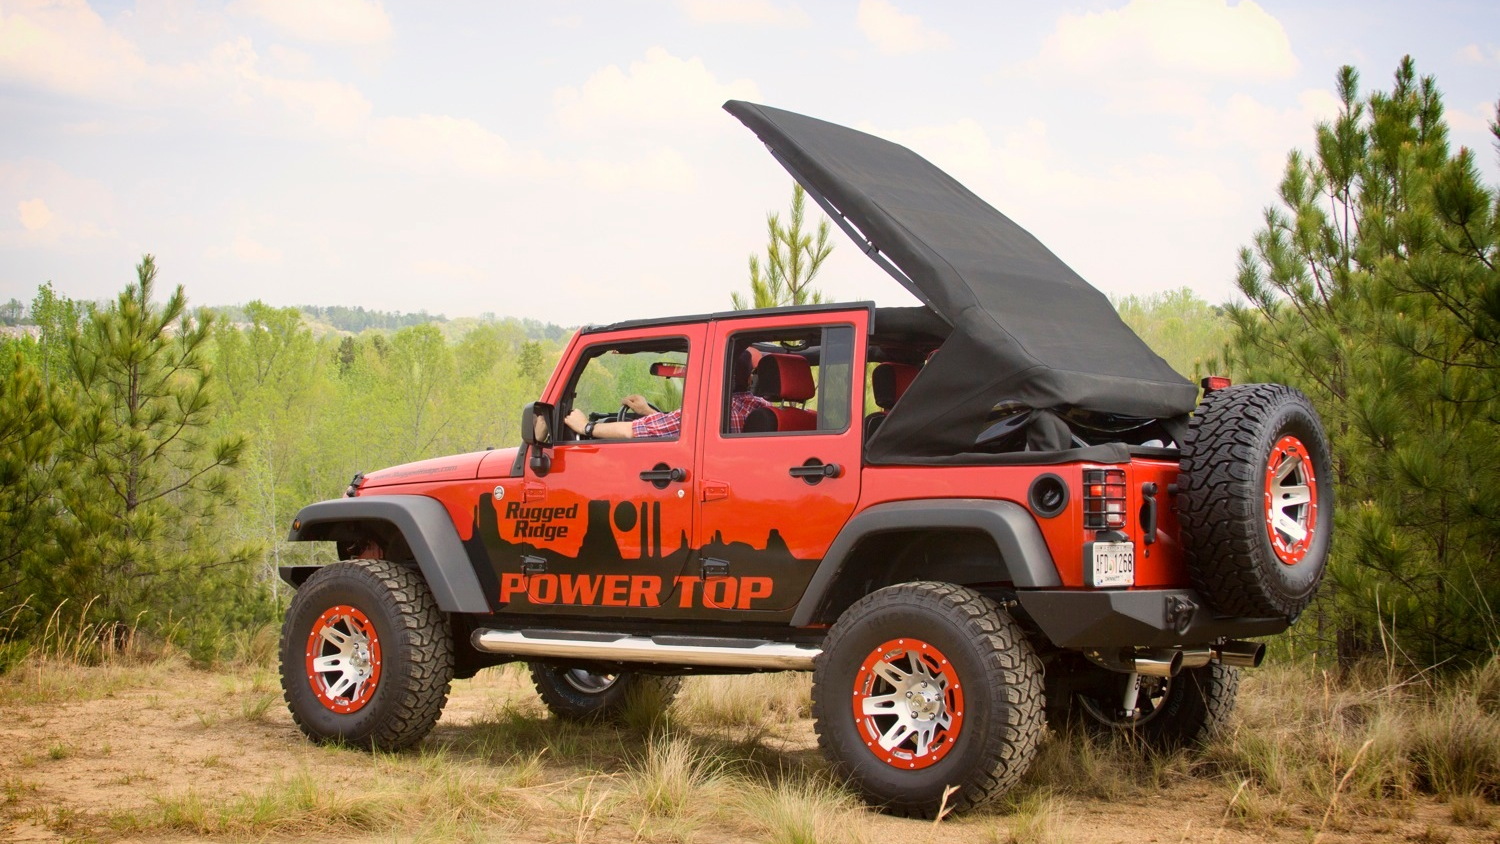 The Rugged Ridge PowerTop, for Jeep Wrangler Unlimited models.